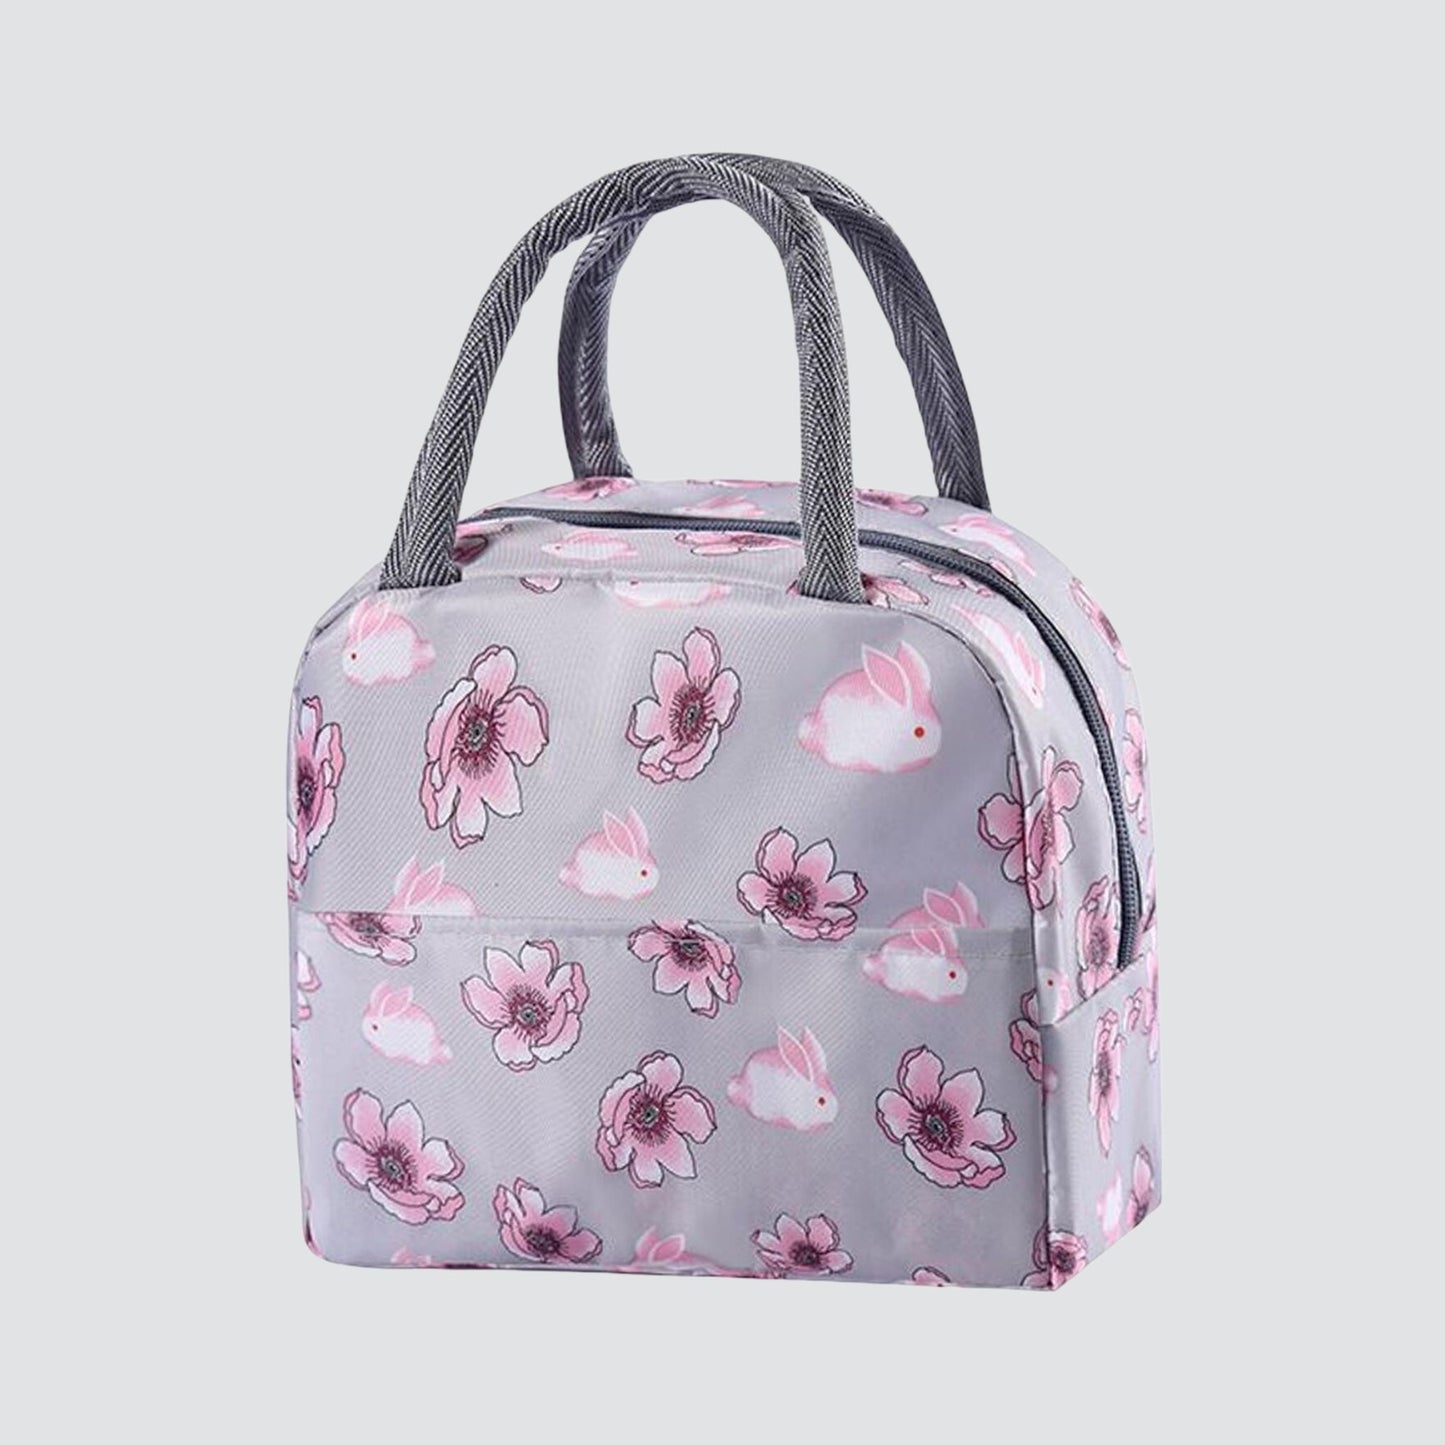 A1242 Insulated Lunch Bag